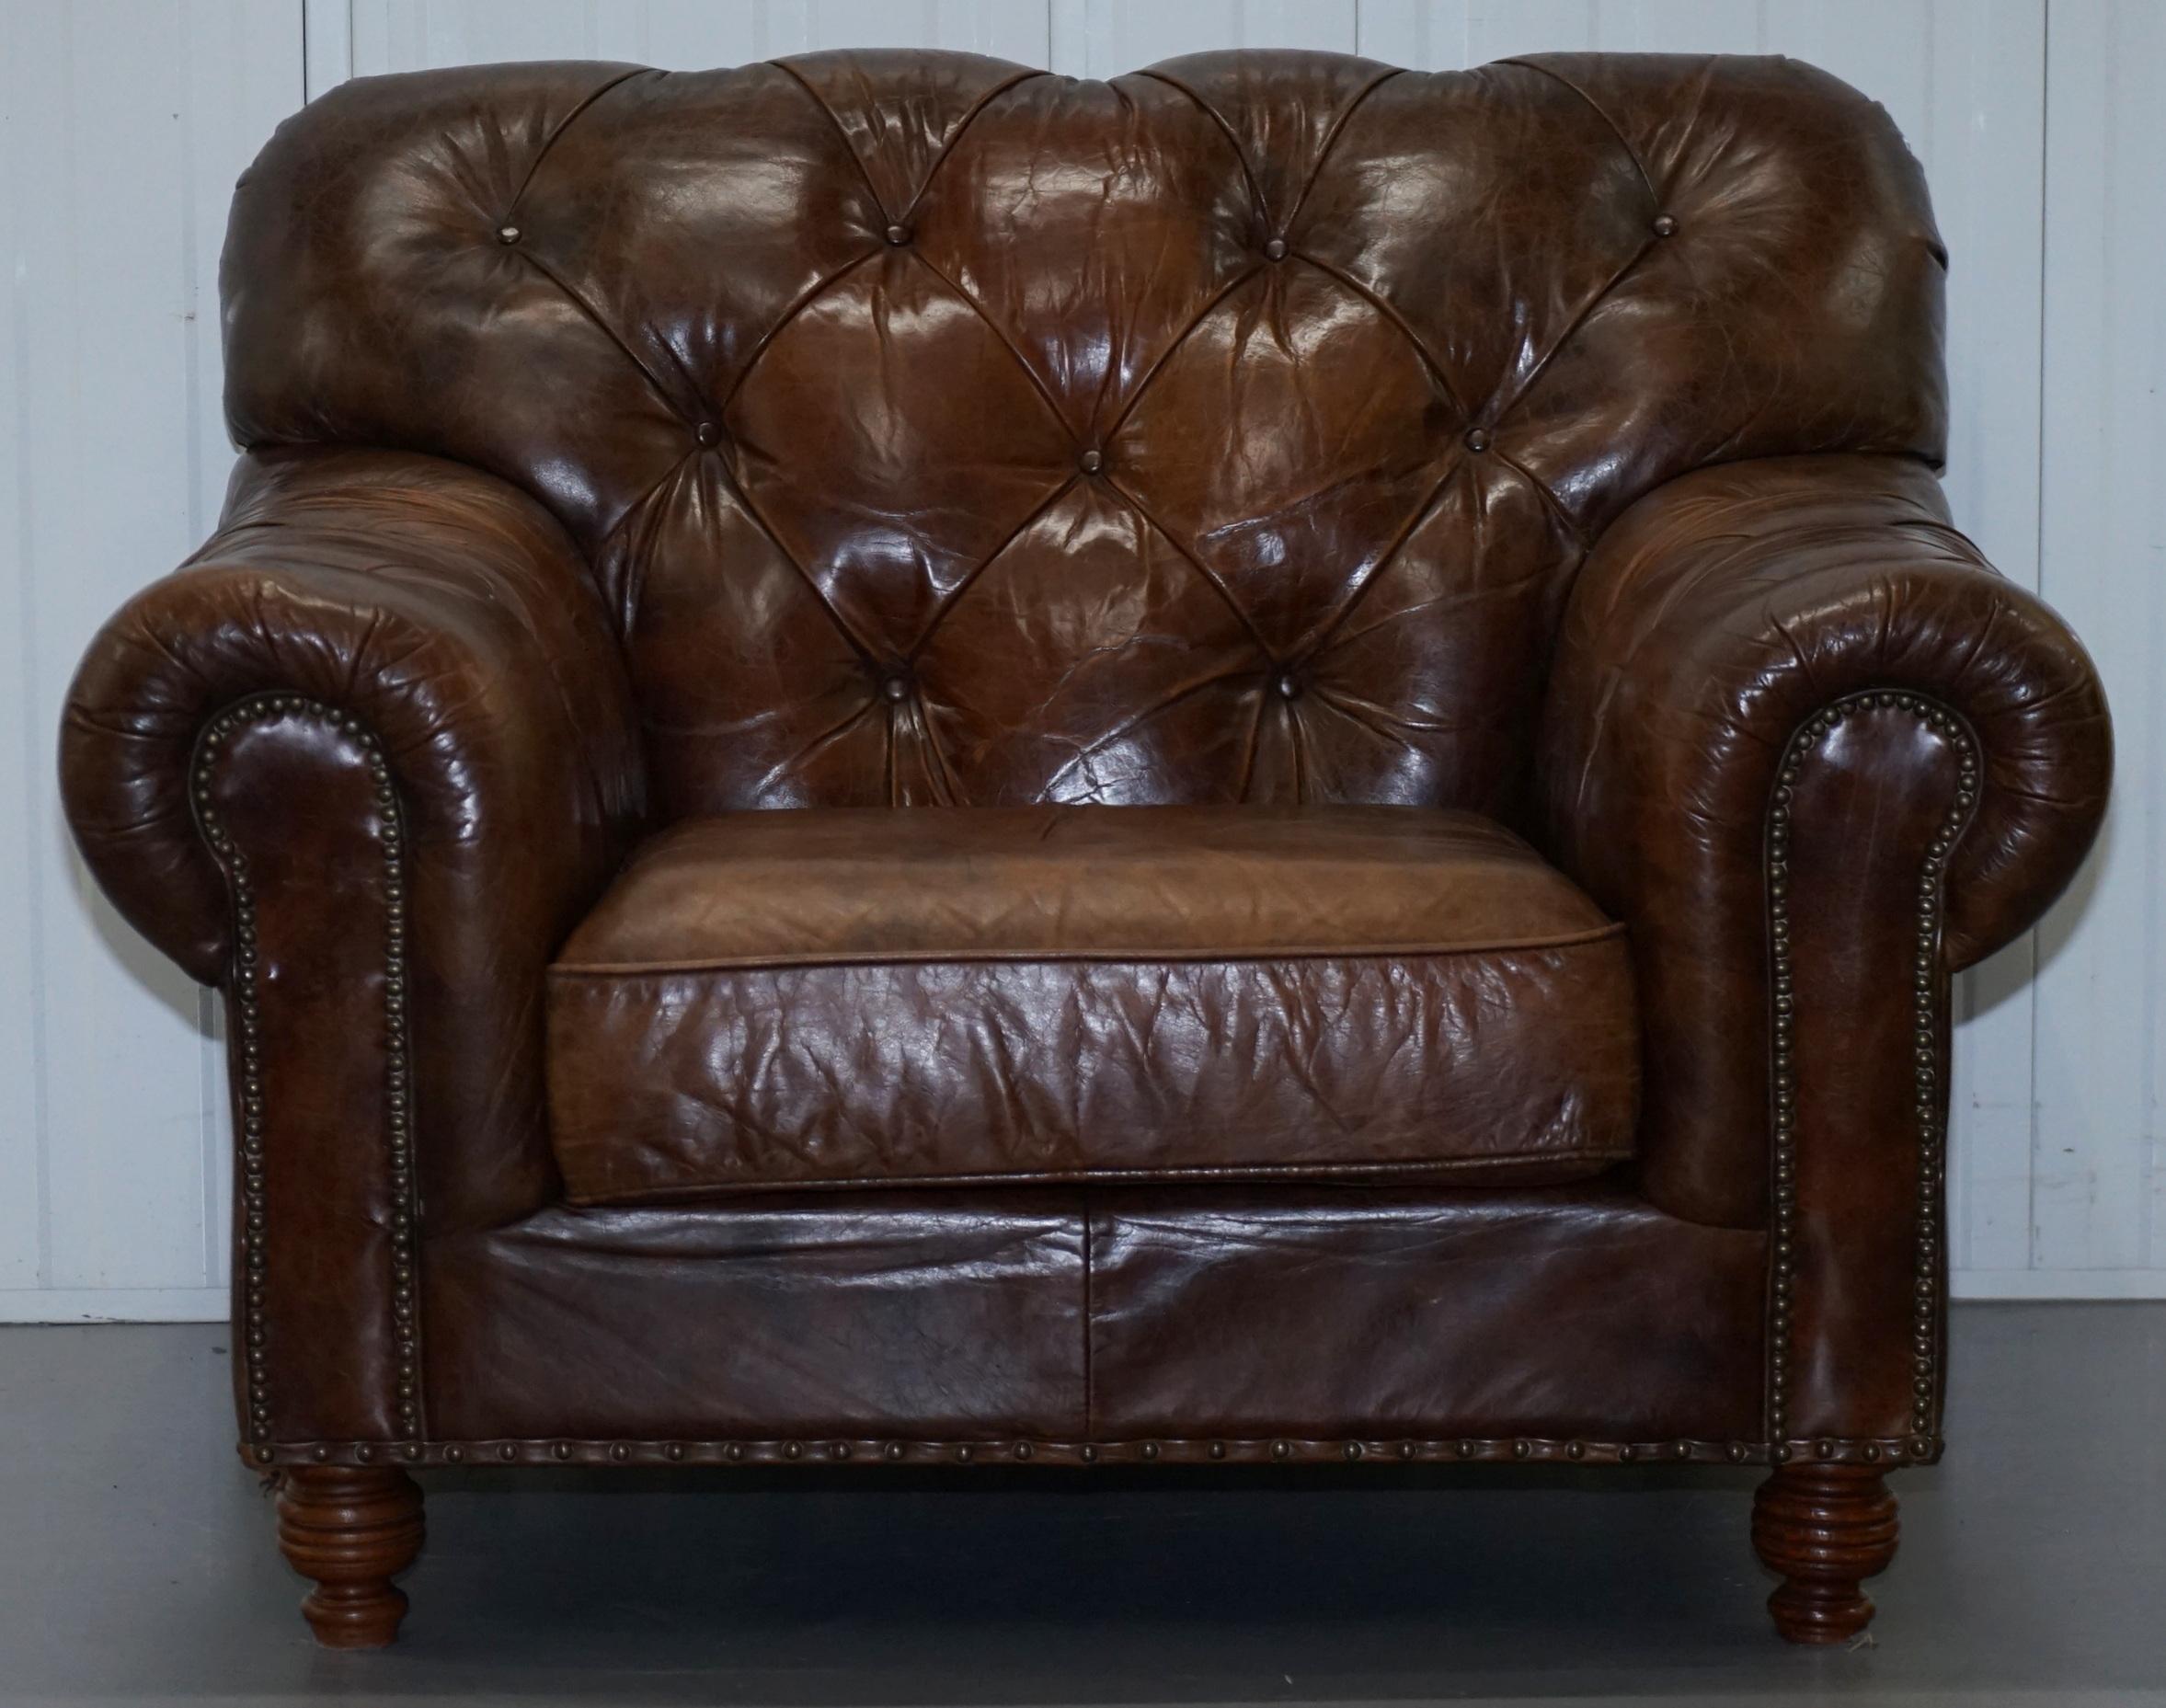 We are delighted to offer for sale this stunning oversized Chesterfield aged brown heritage leather Halo club armchair

A very good looking and large armchair, the leather has been hand dyed six times to achieve this lovely vintage distressed look